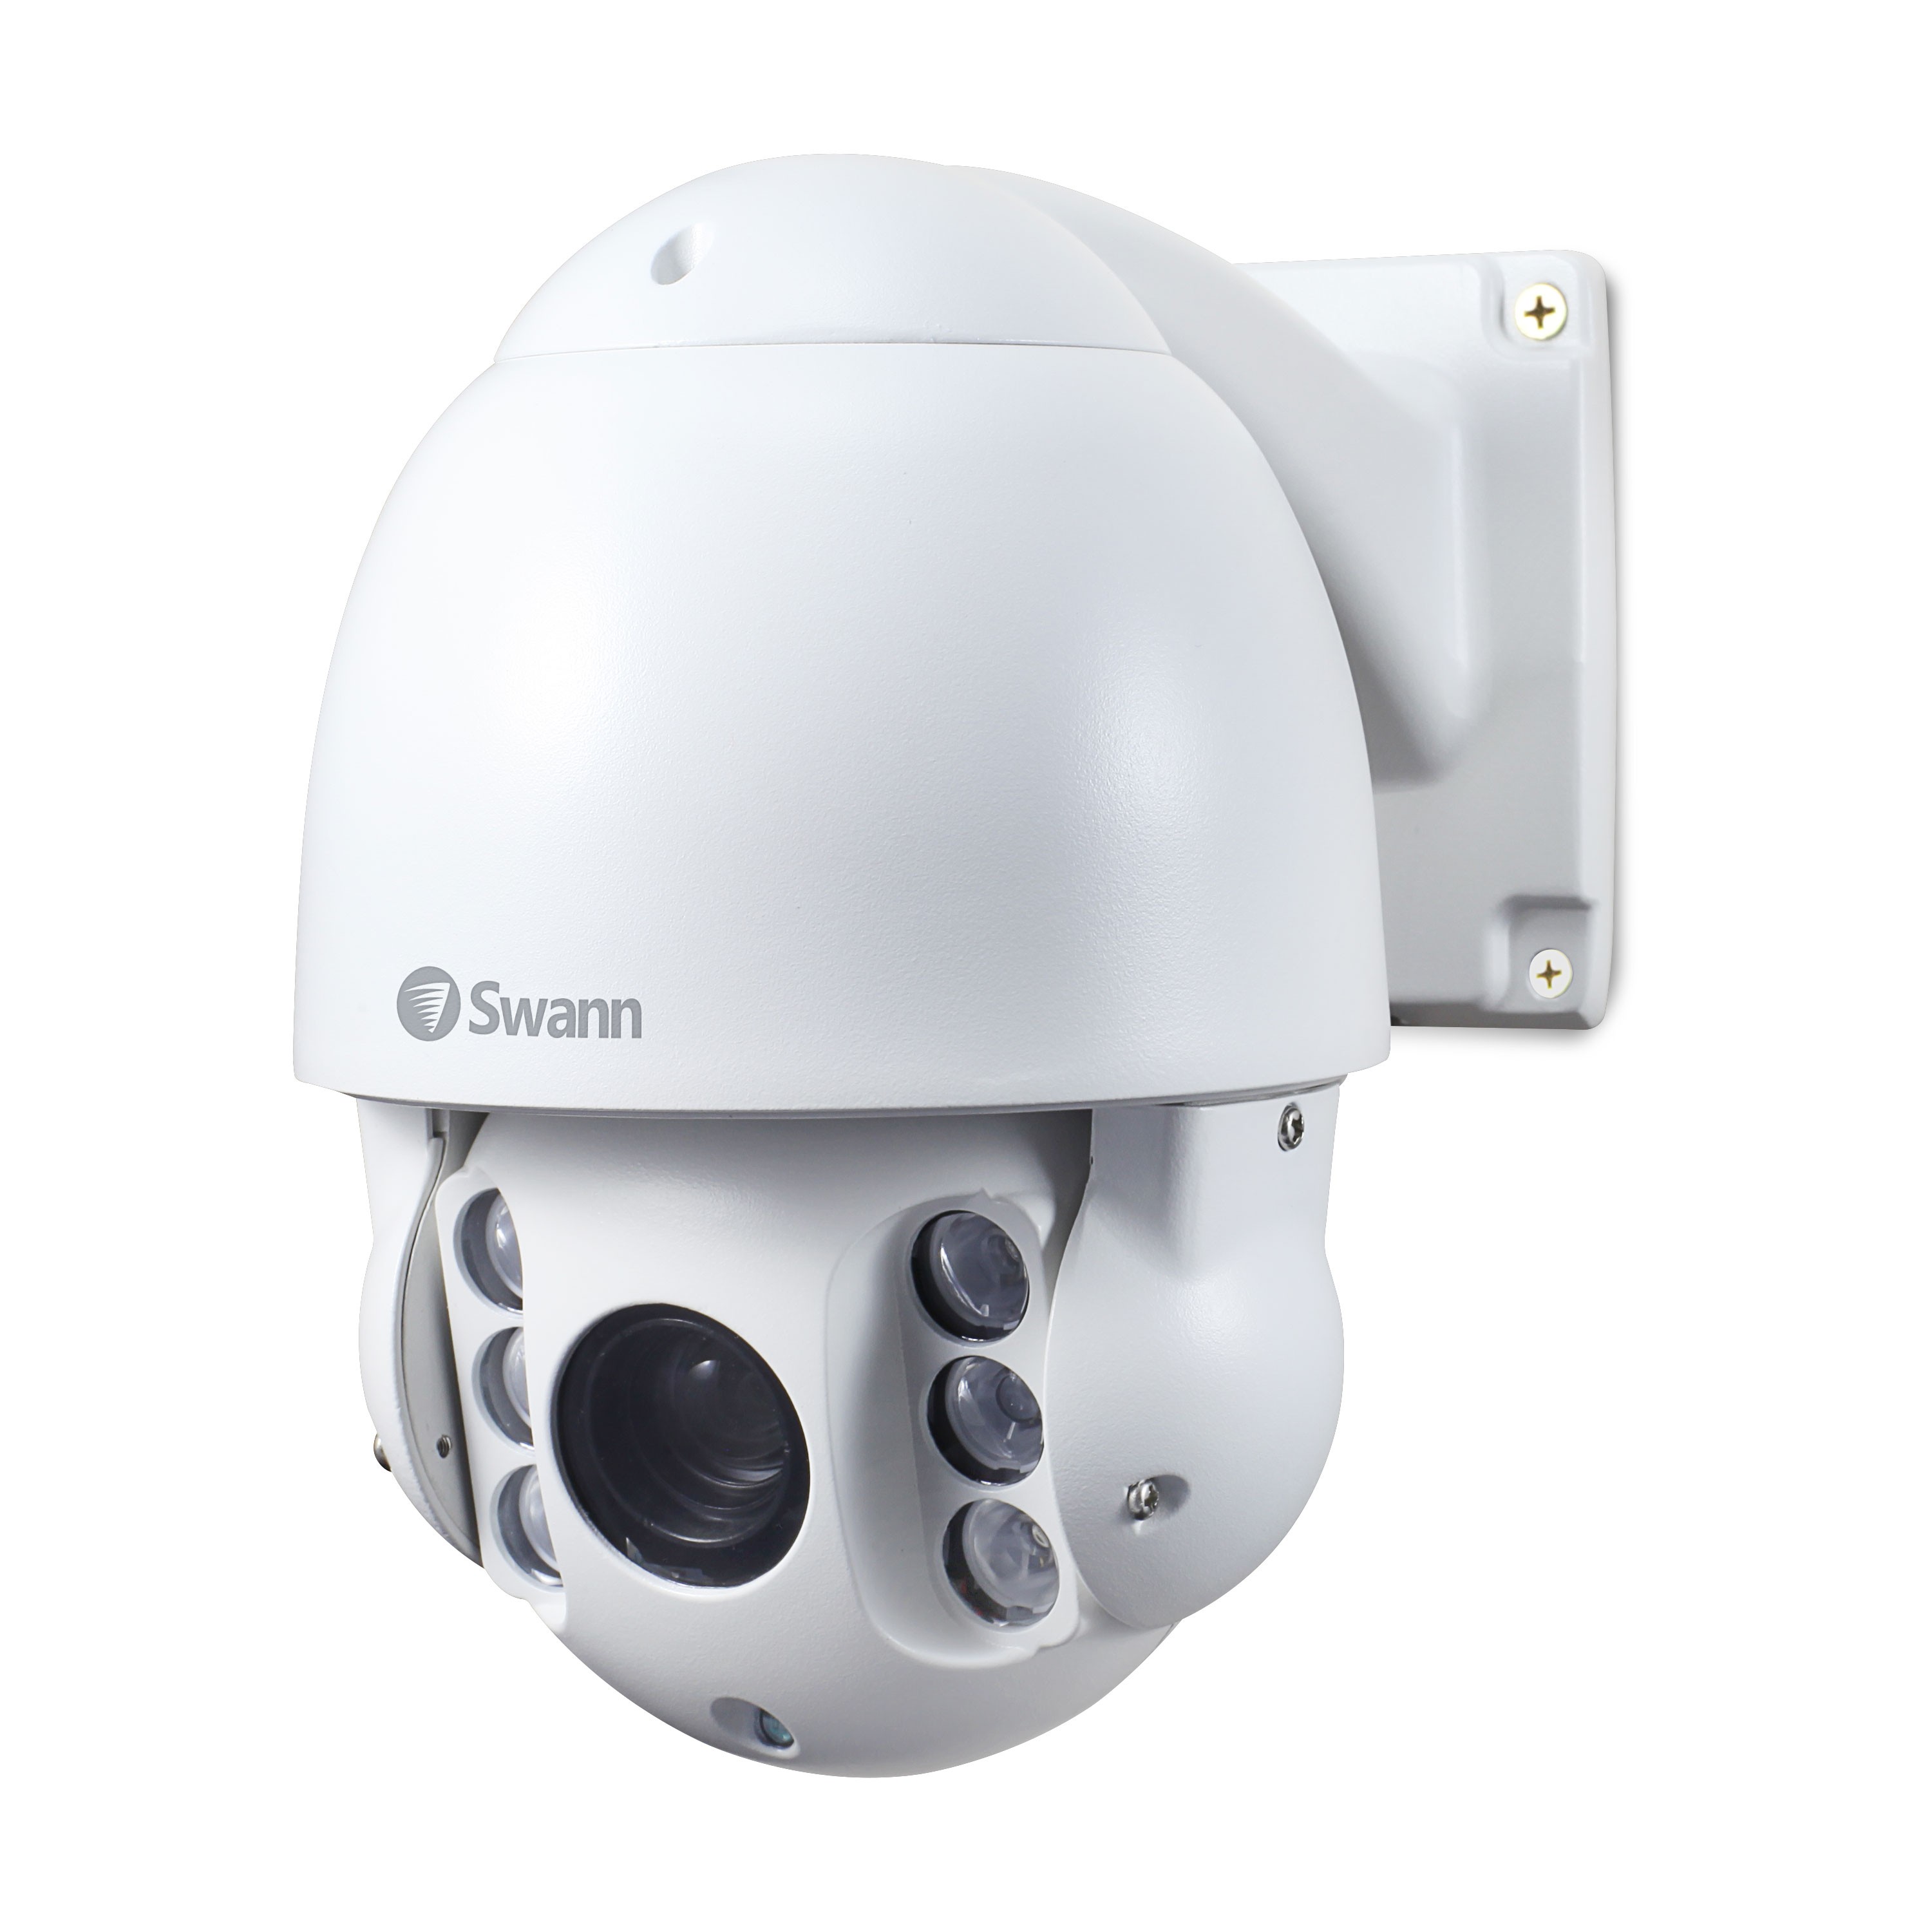 Swann Outdoor Security Camera - PRO-1080PTZ | Swann Communications USA